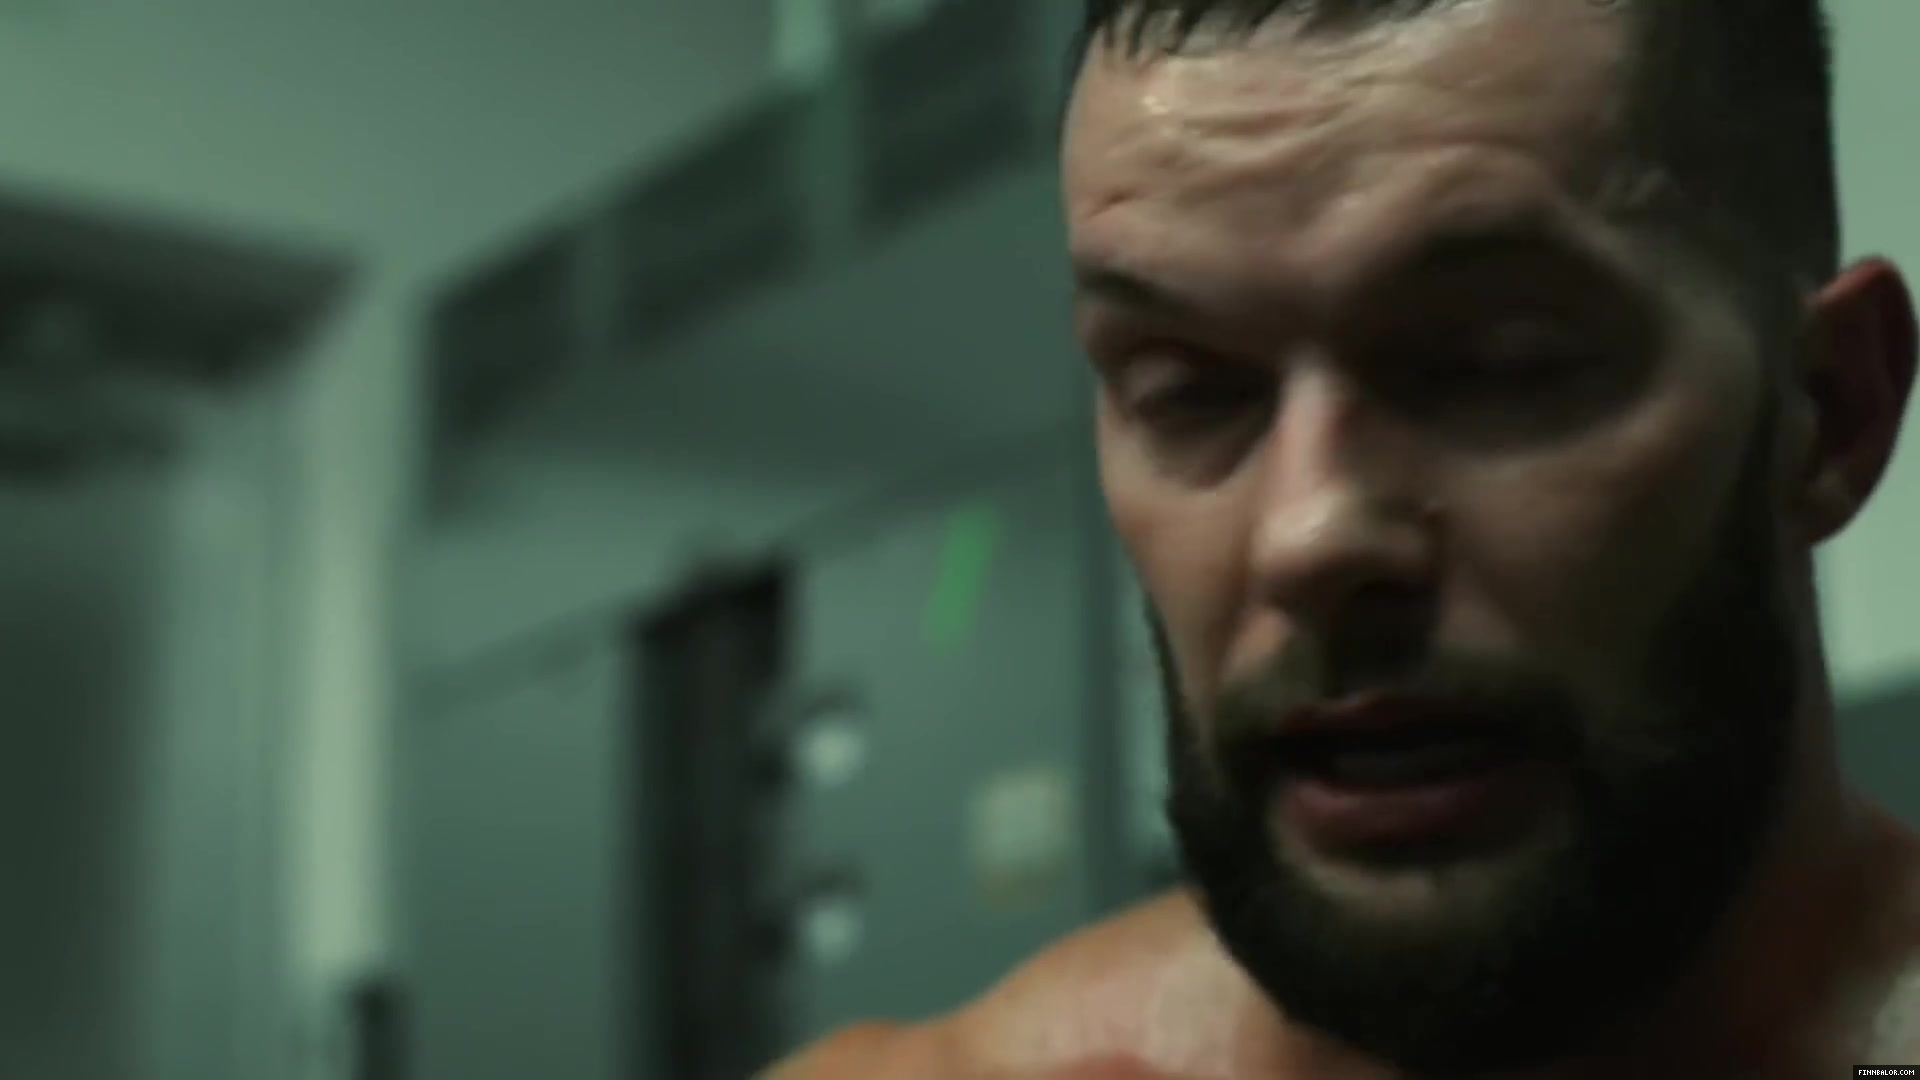 Finn_Balor___The_Rising_of_the_Prince_in_NXT_317.jpg